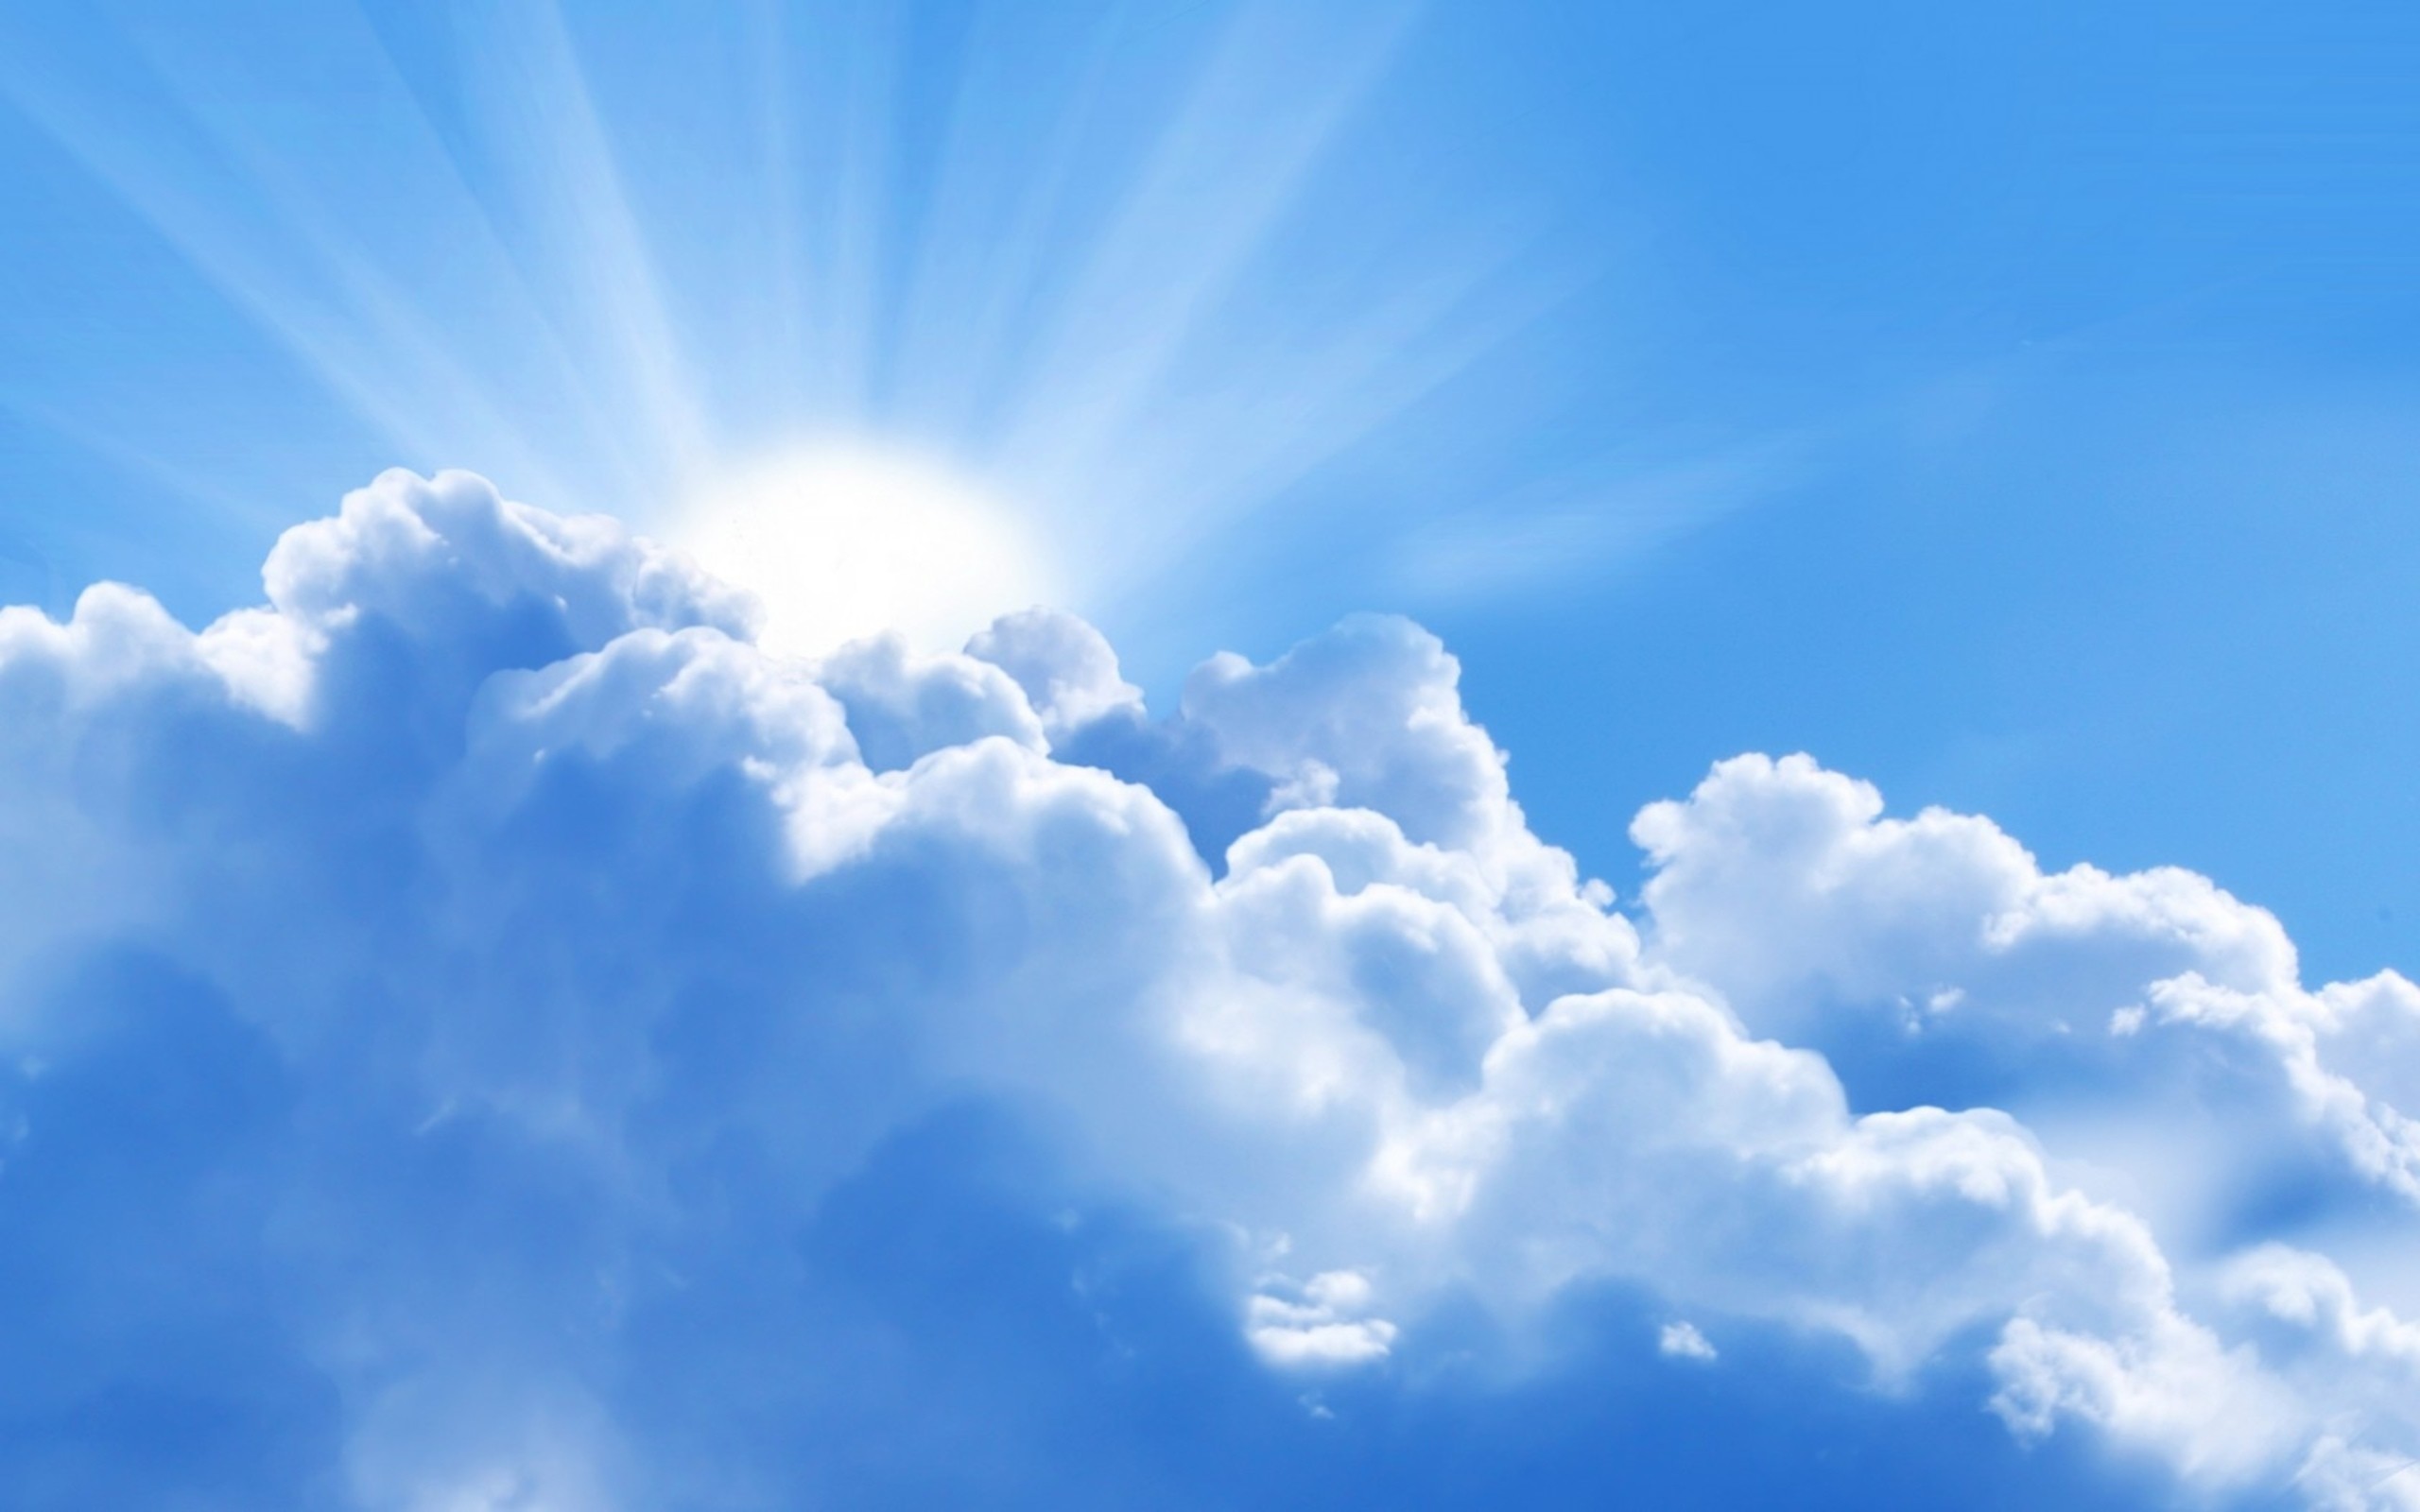 Blue Sky and Clouds Wallpaper (57+ images)